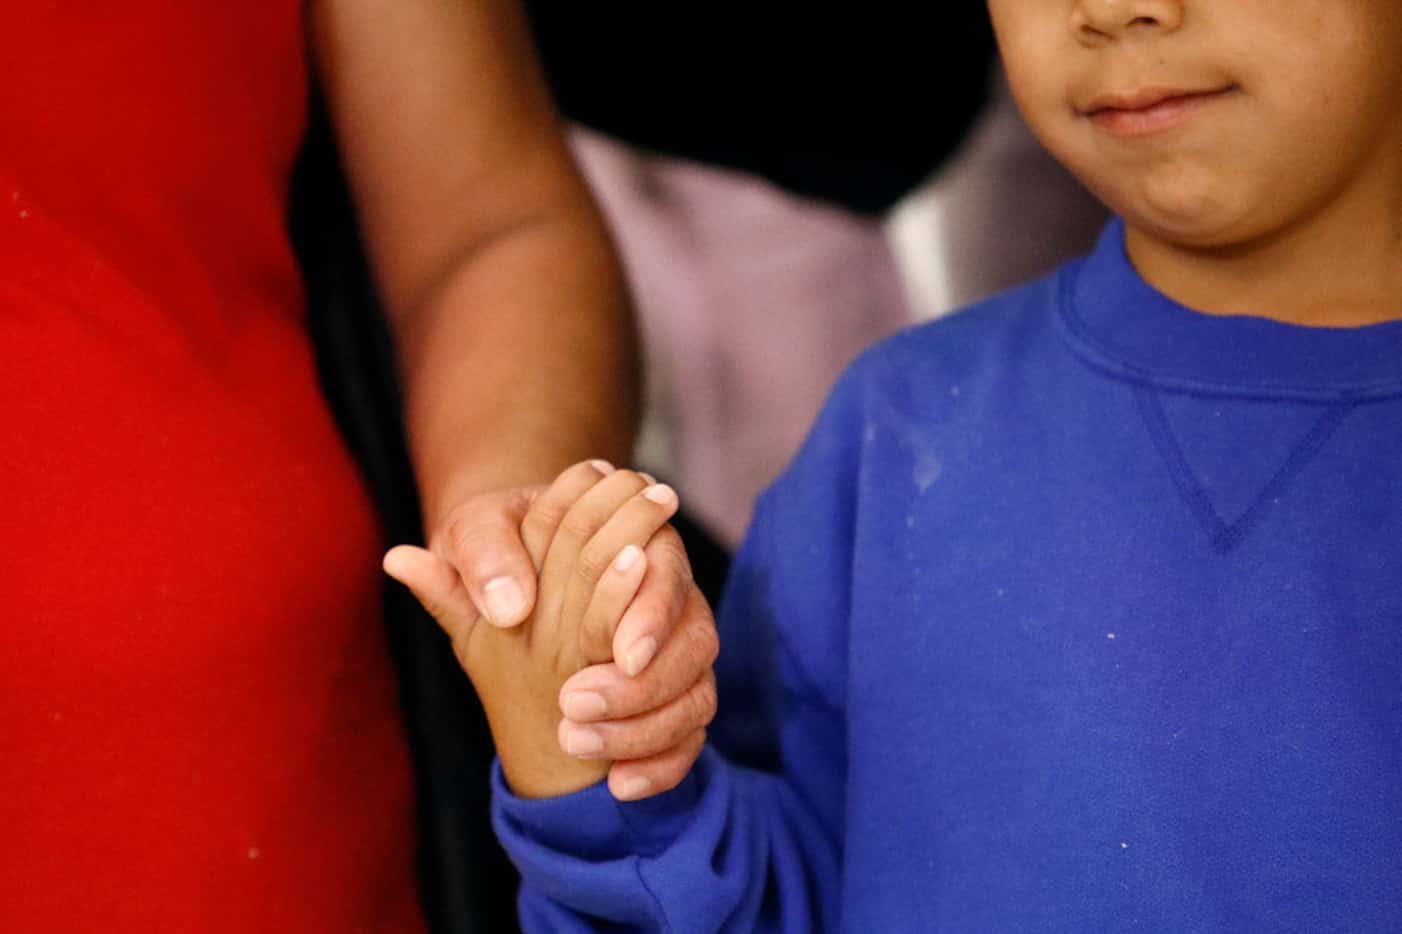 On June 22, a mother (left) and son, from Guatemala, hold hands during a news conference...